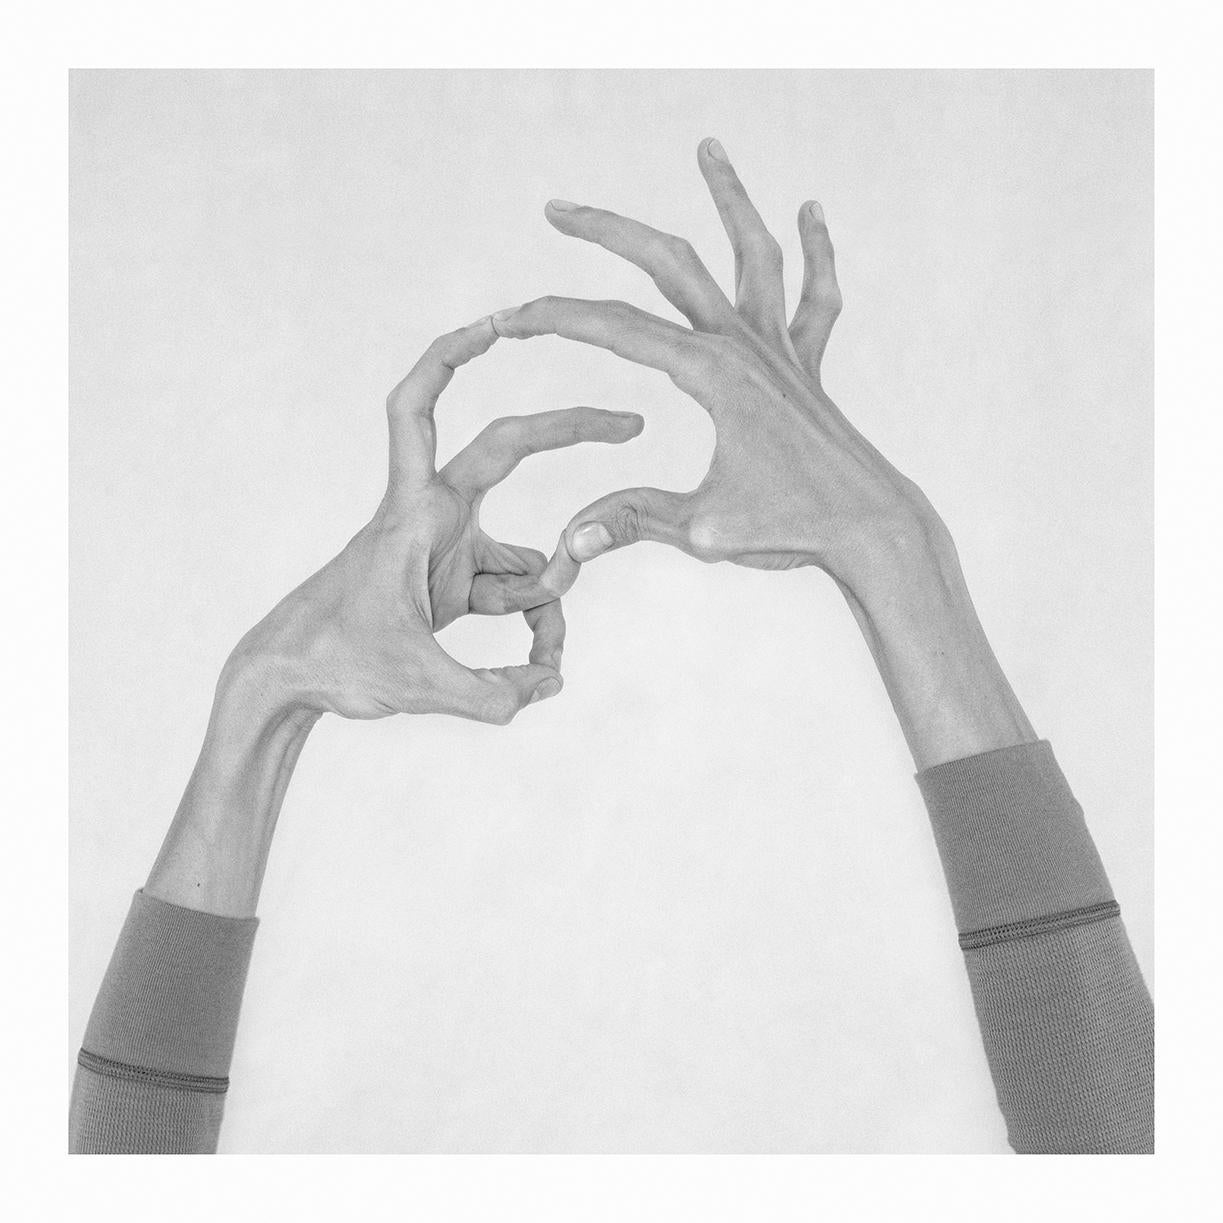 Nico Baixas / Gos-com-fuig Figurative Photograph - Untitled XXX. From the Series Chiromorphose. Hands. Black & White Photography